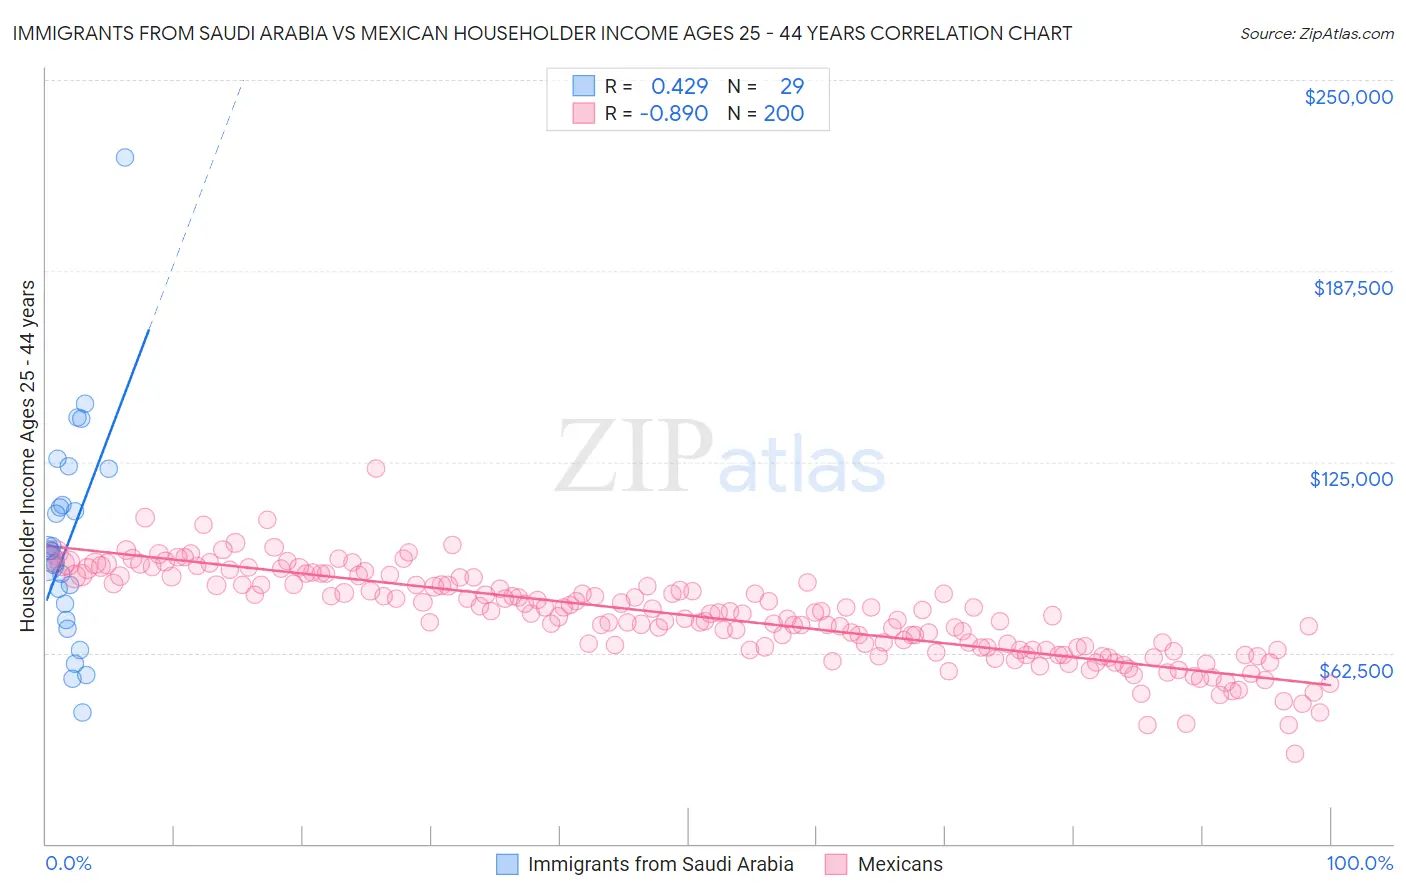 Immigrants from Saudi Arabia vs Mexican Householder Income Ages 25 - 44 years